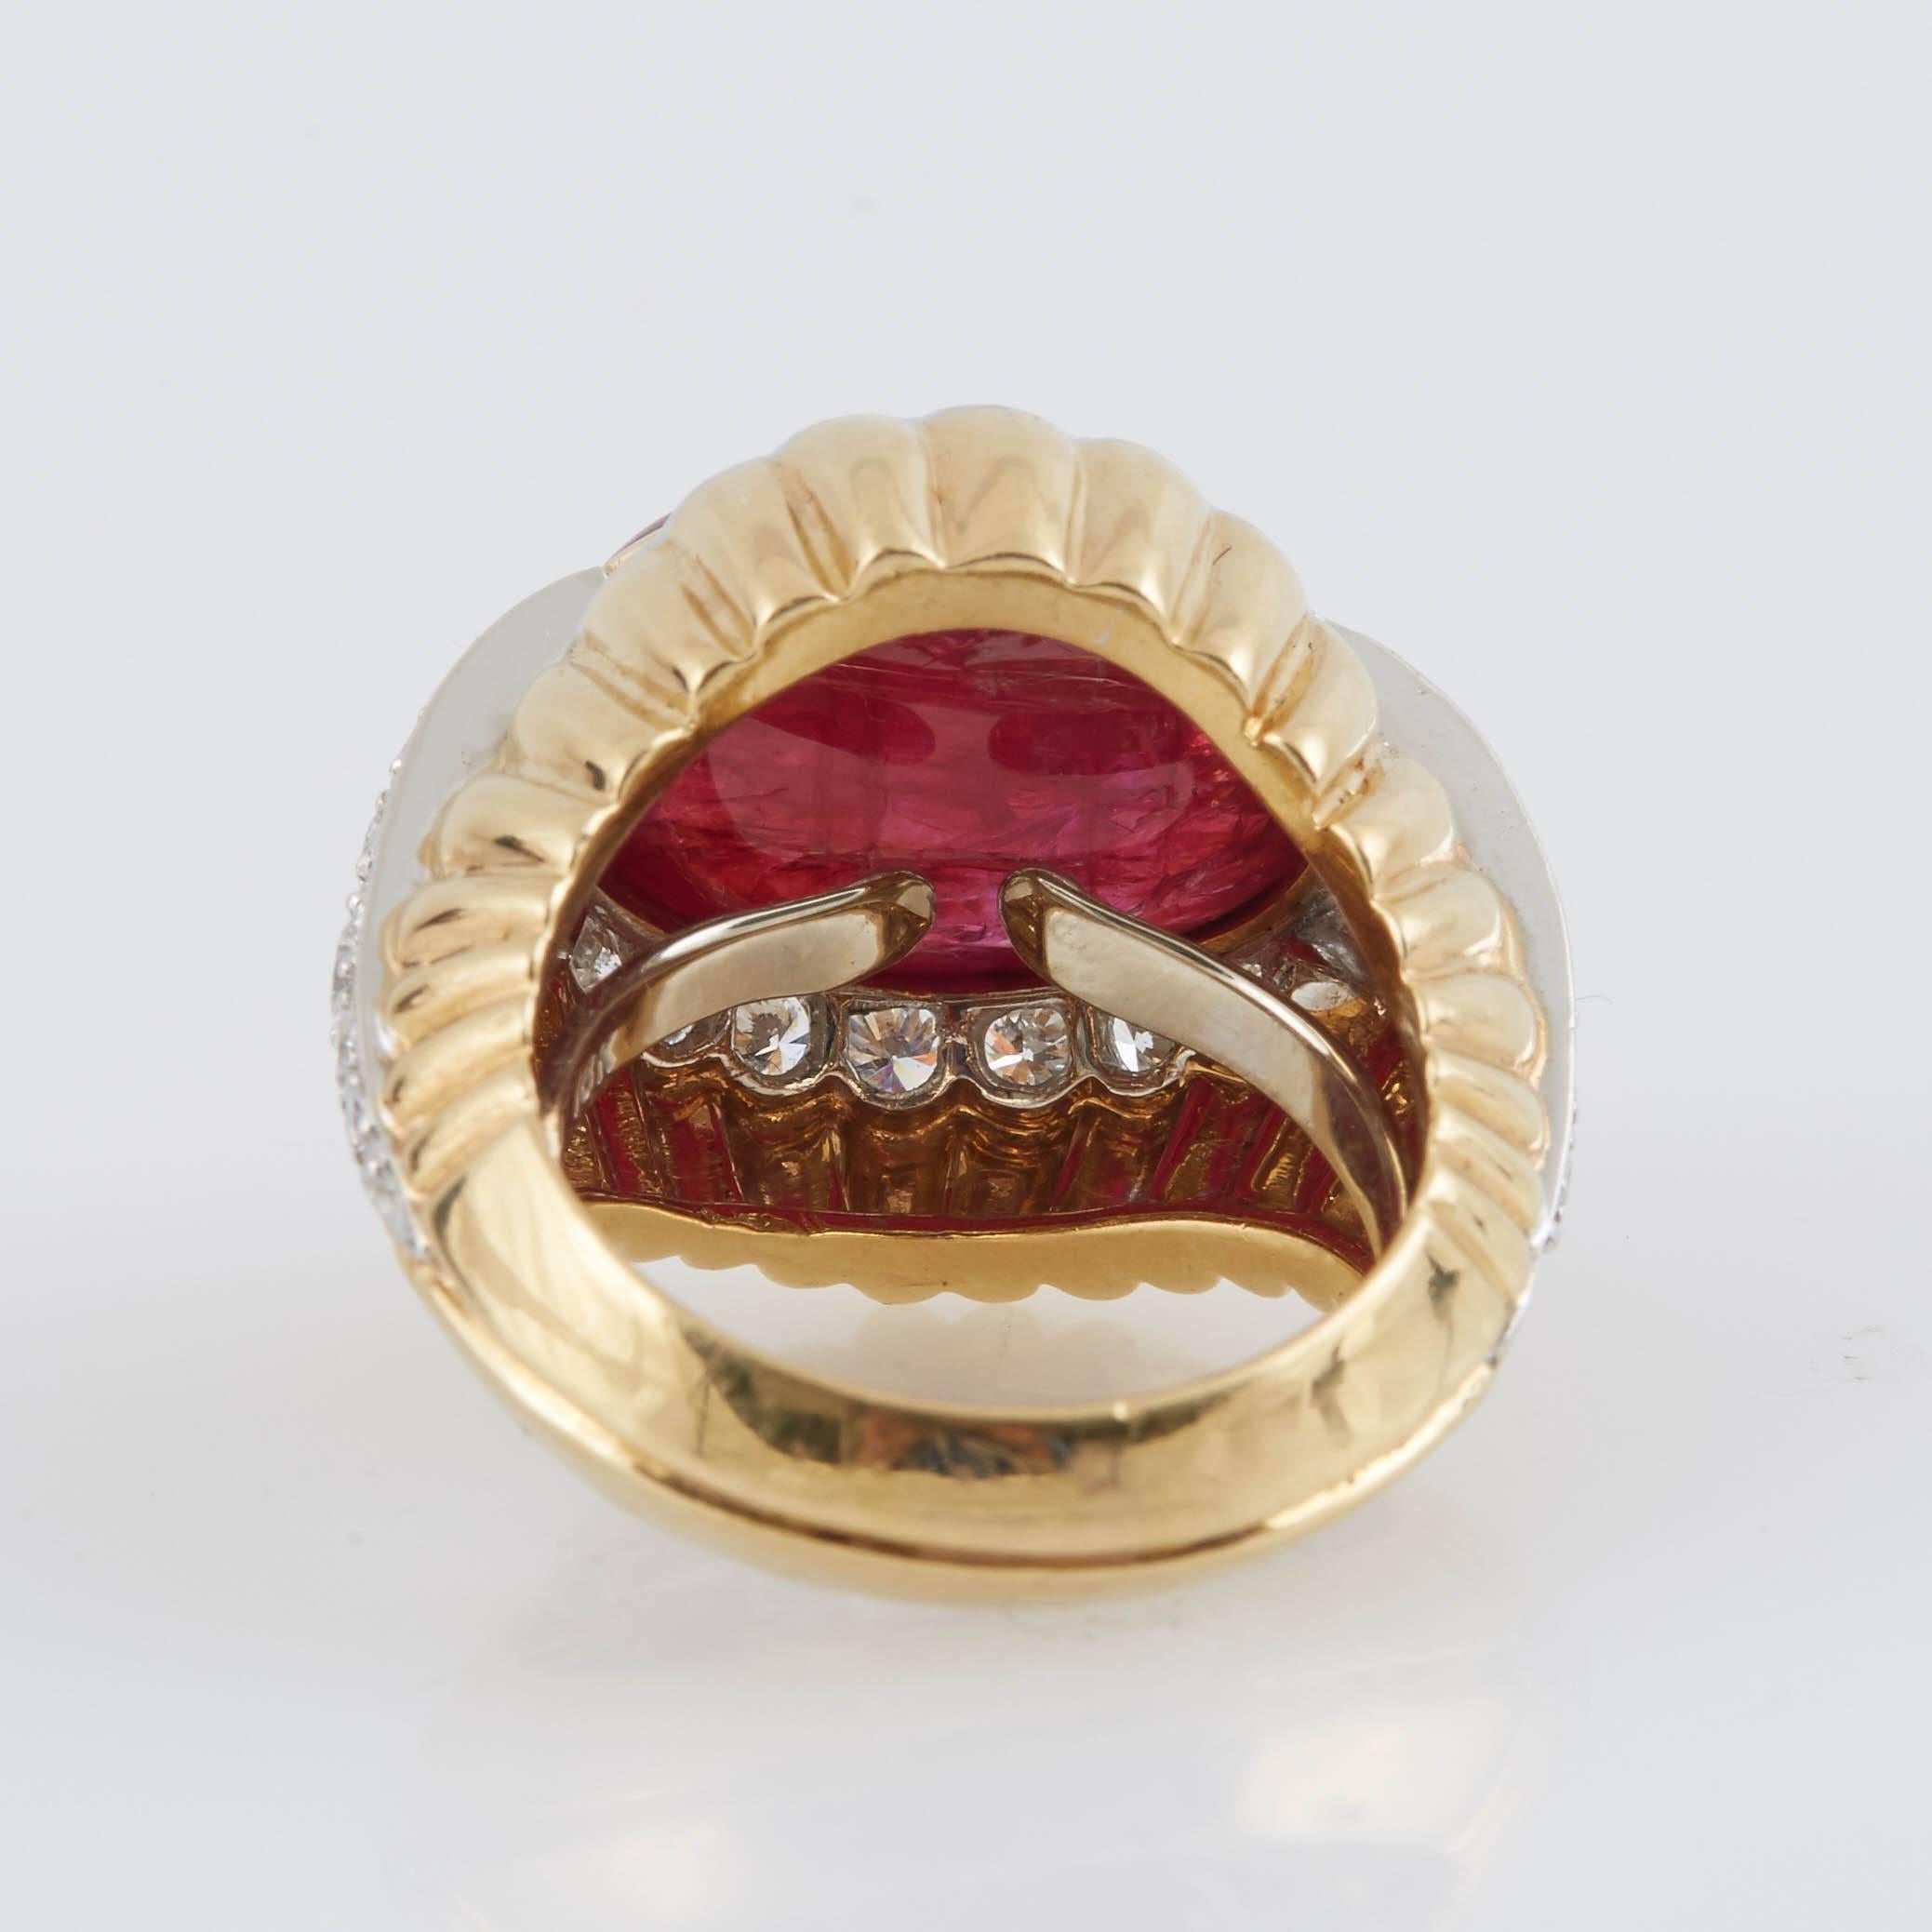 David Webb earrings and ring set, finely crafted in 18k yellow gold with an oval shaped cabochon ruby weighing approximately a total of 22.00 carats and diamonds weighing approximately a total of 7.00 carats.